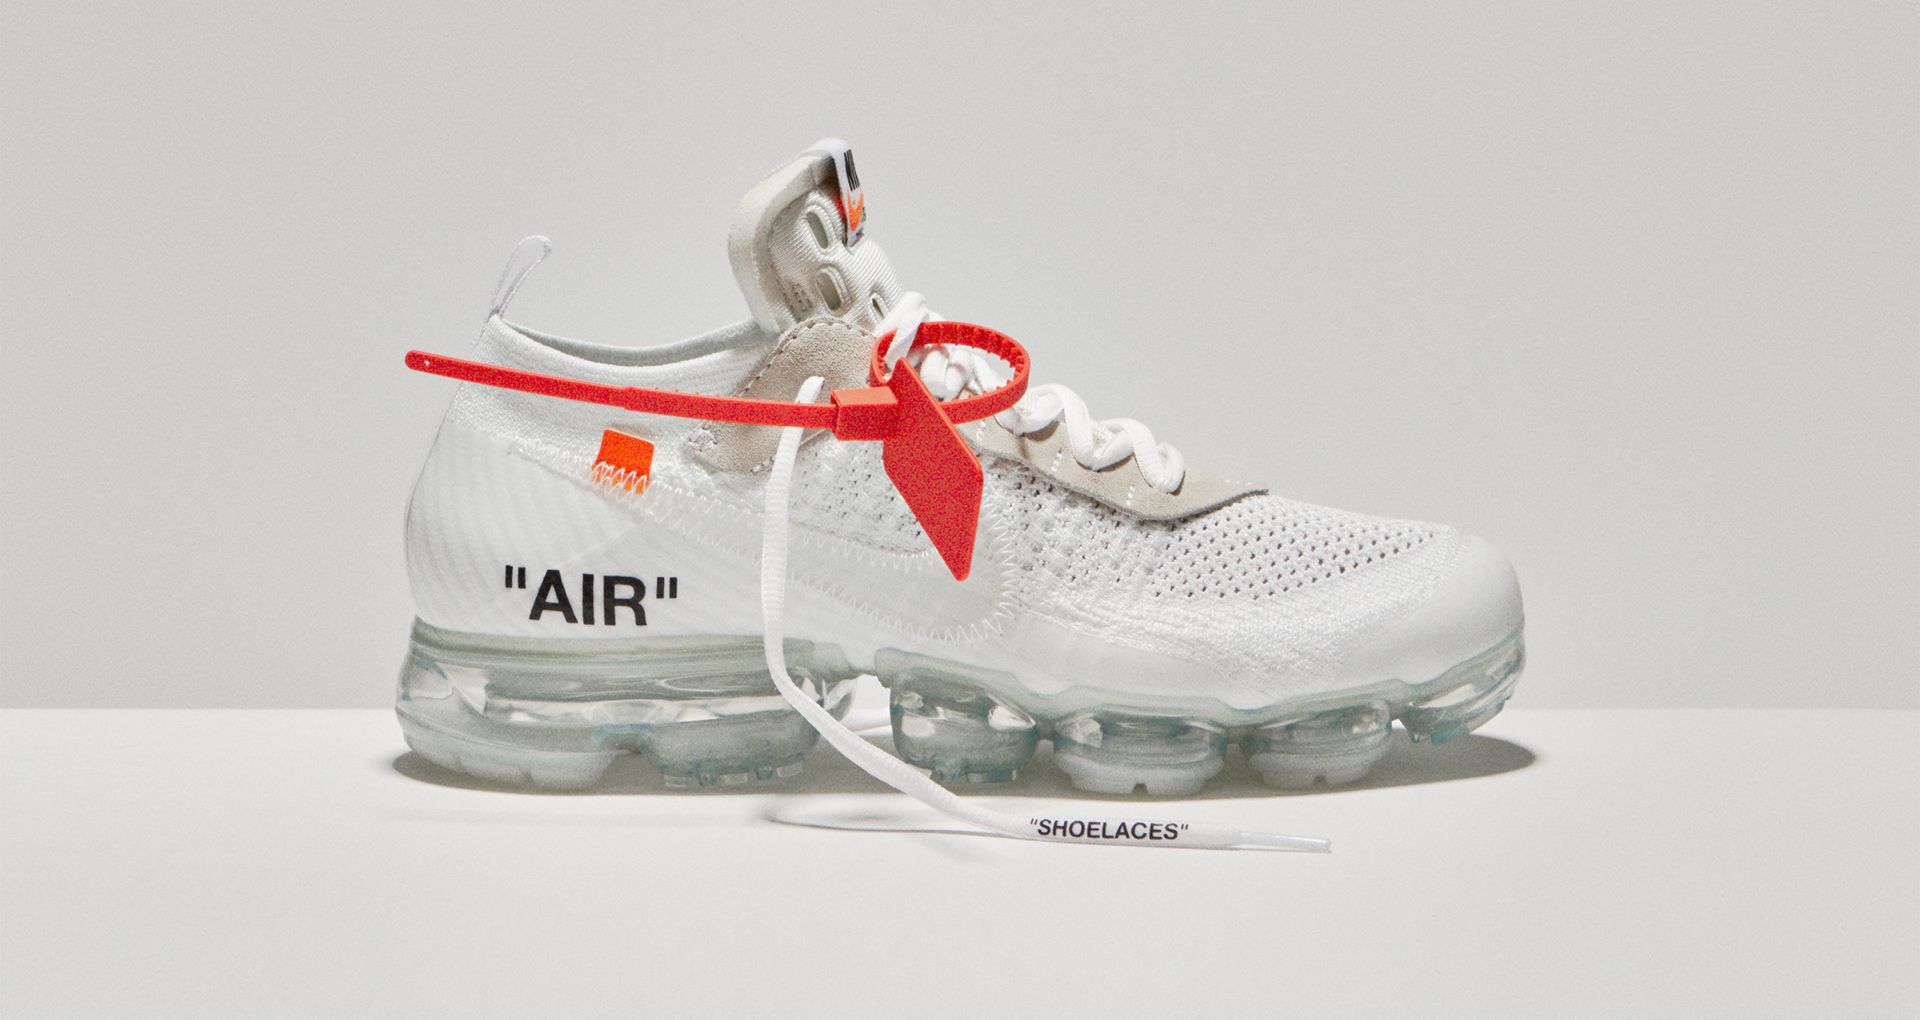 Nike The Ten Air Vapormax Off-White 'White' Release Date. Nike SNKRS